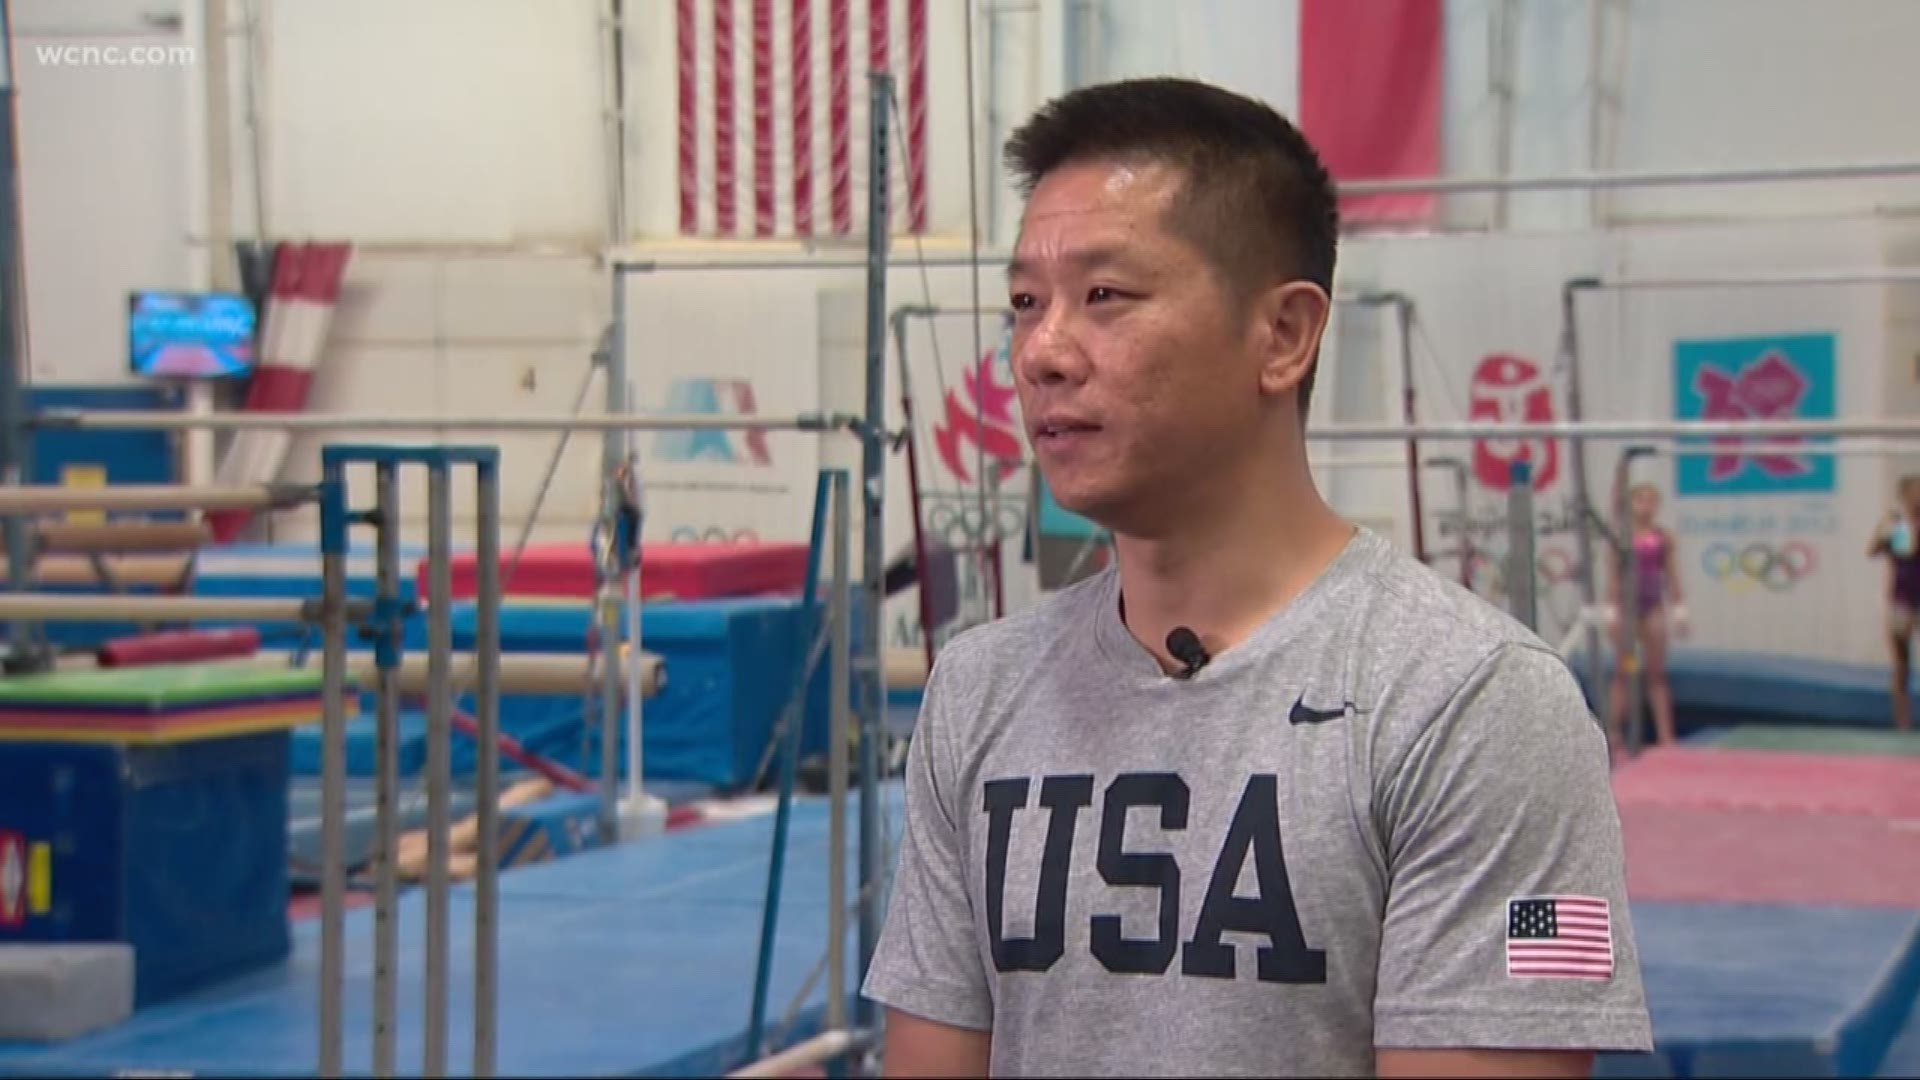 A local gymnastics coach was accused of emotionally and physically abusing athletes, according to an investigation by The New York Times.